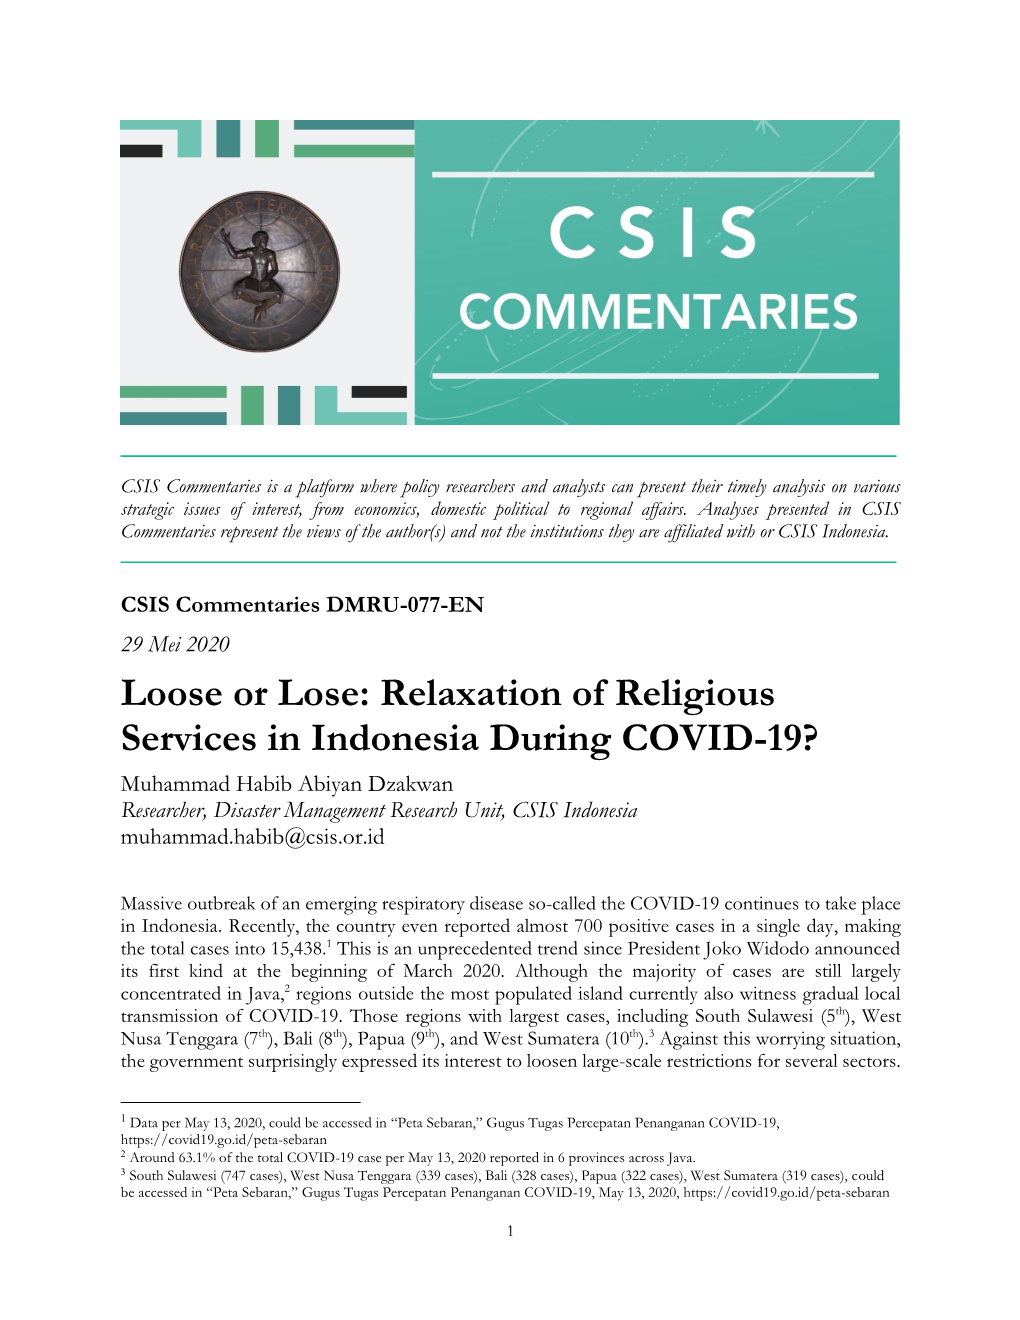 Relaxation of Religious Services in Indonesia During COVID-19?